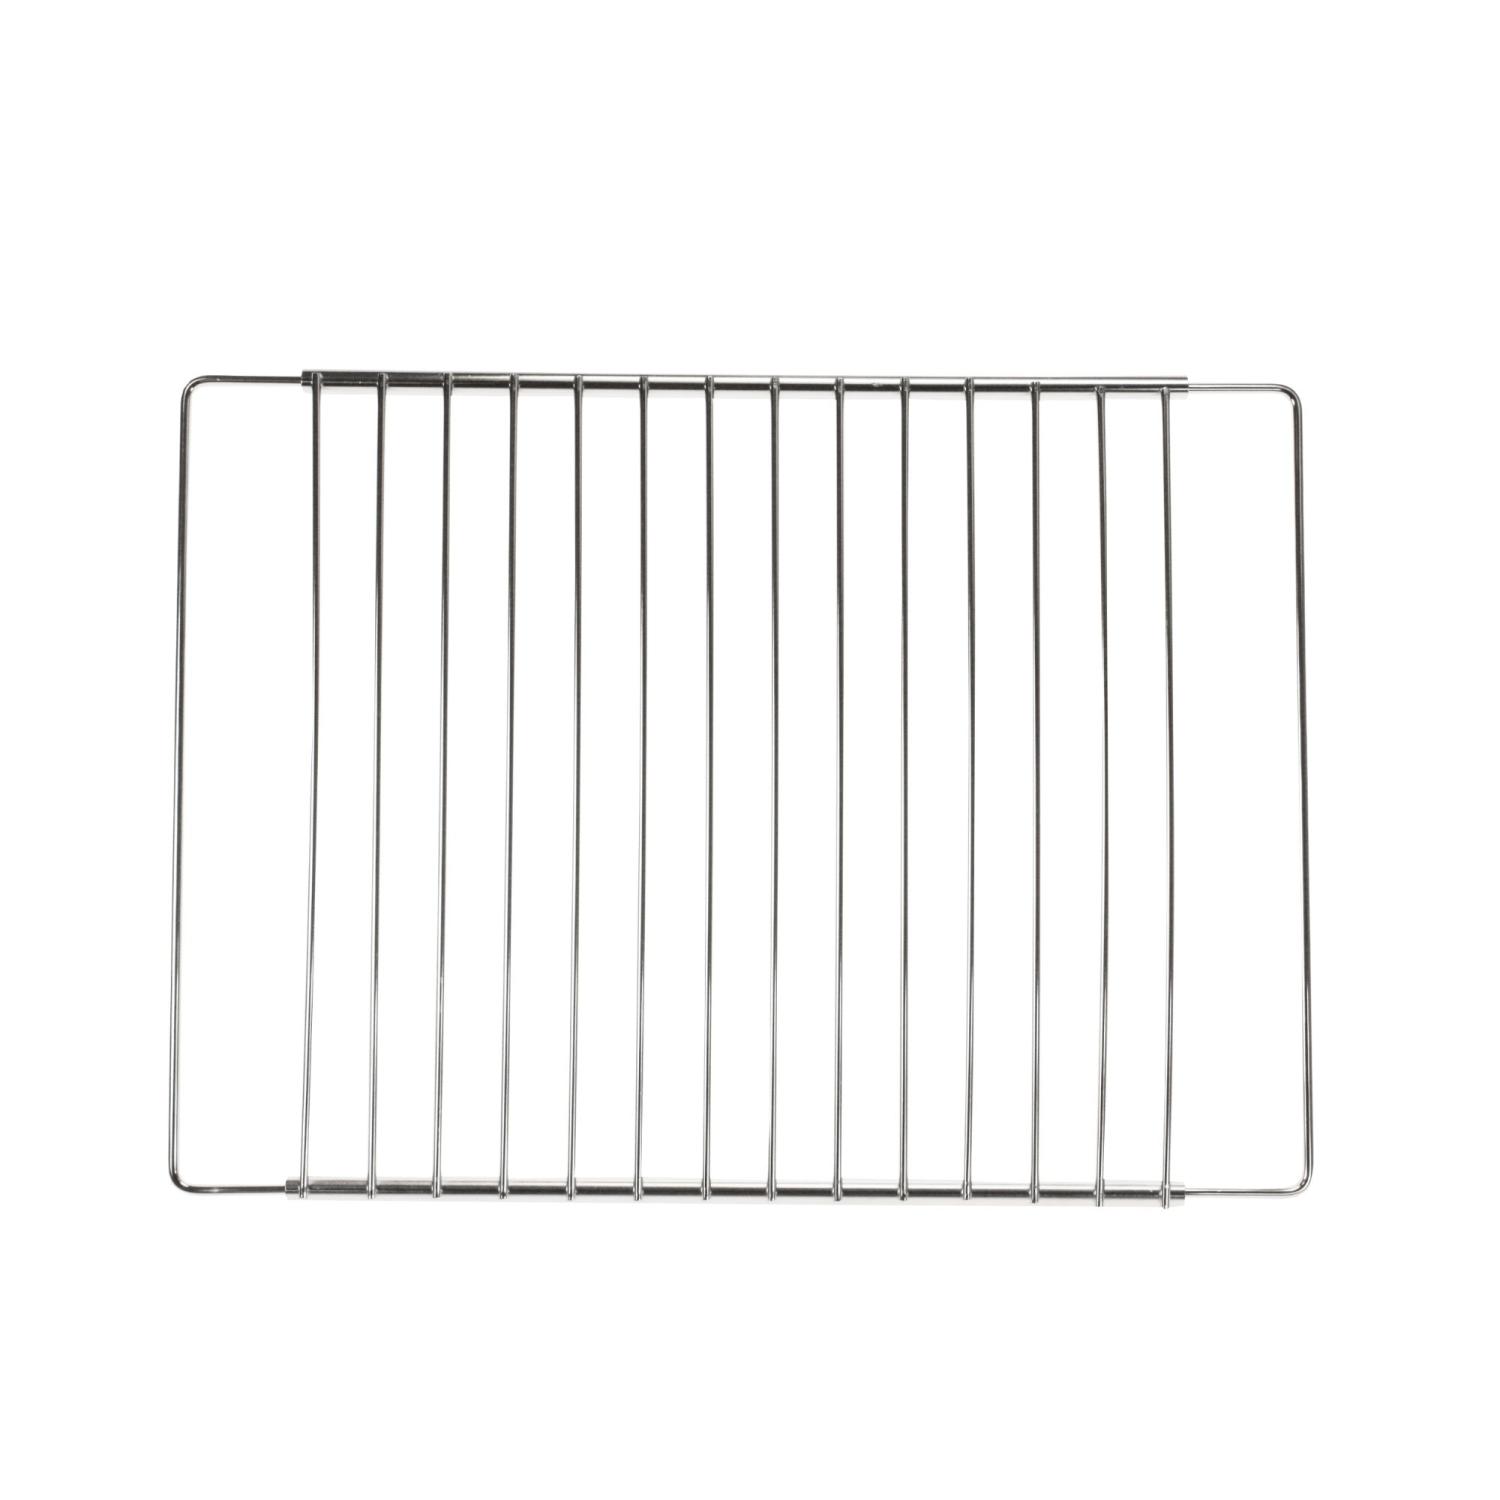 Universal-Grillrost, grill rack, Grillrost, BBQ-Grill, Barbecue-Grill, BBQ-Grillständer, Barbecue-Grillständer, Lieferant, Dropshipping, Großhandel